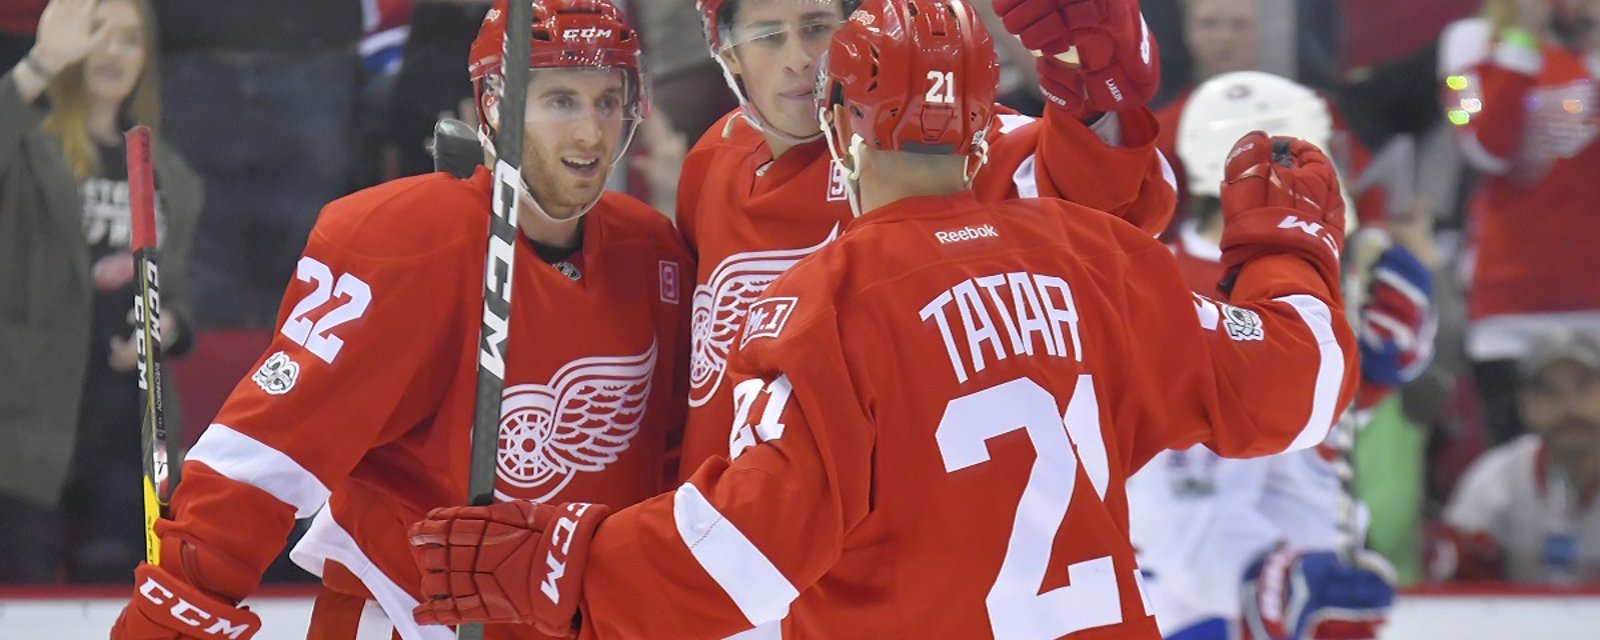 Breaking: Wings forward may need up to six months to recover from surgery.